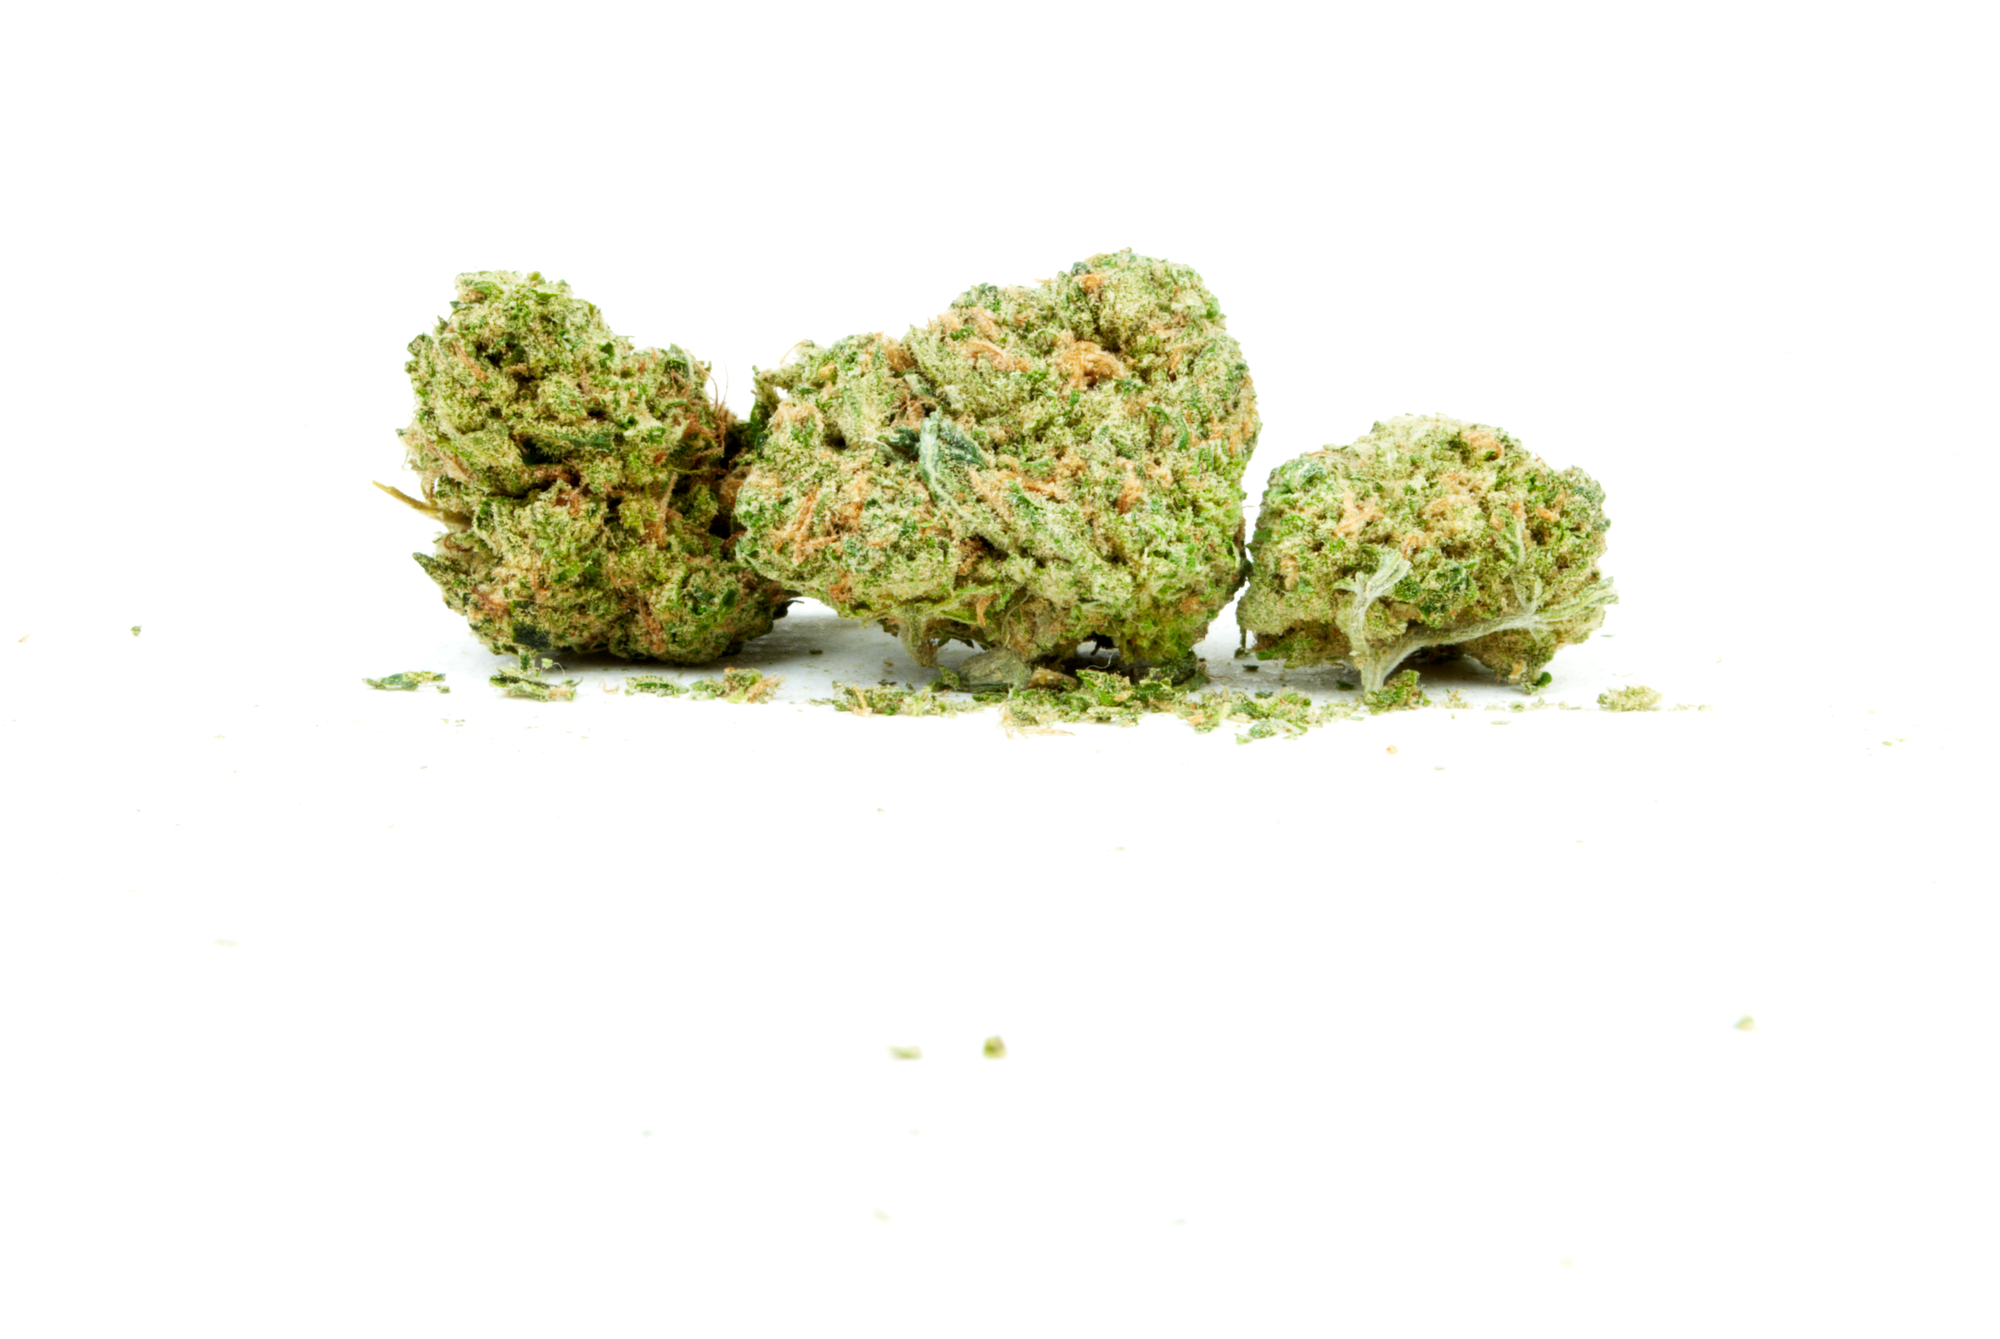 ice cream weed strain potency, relaxing effects of ice cream cake strain, mad scientist genetics,